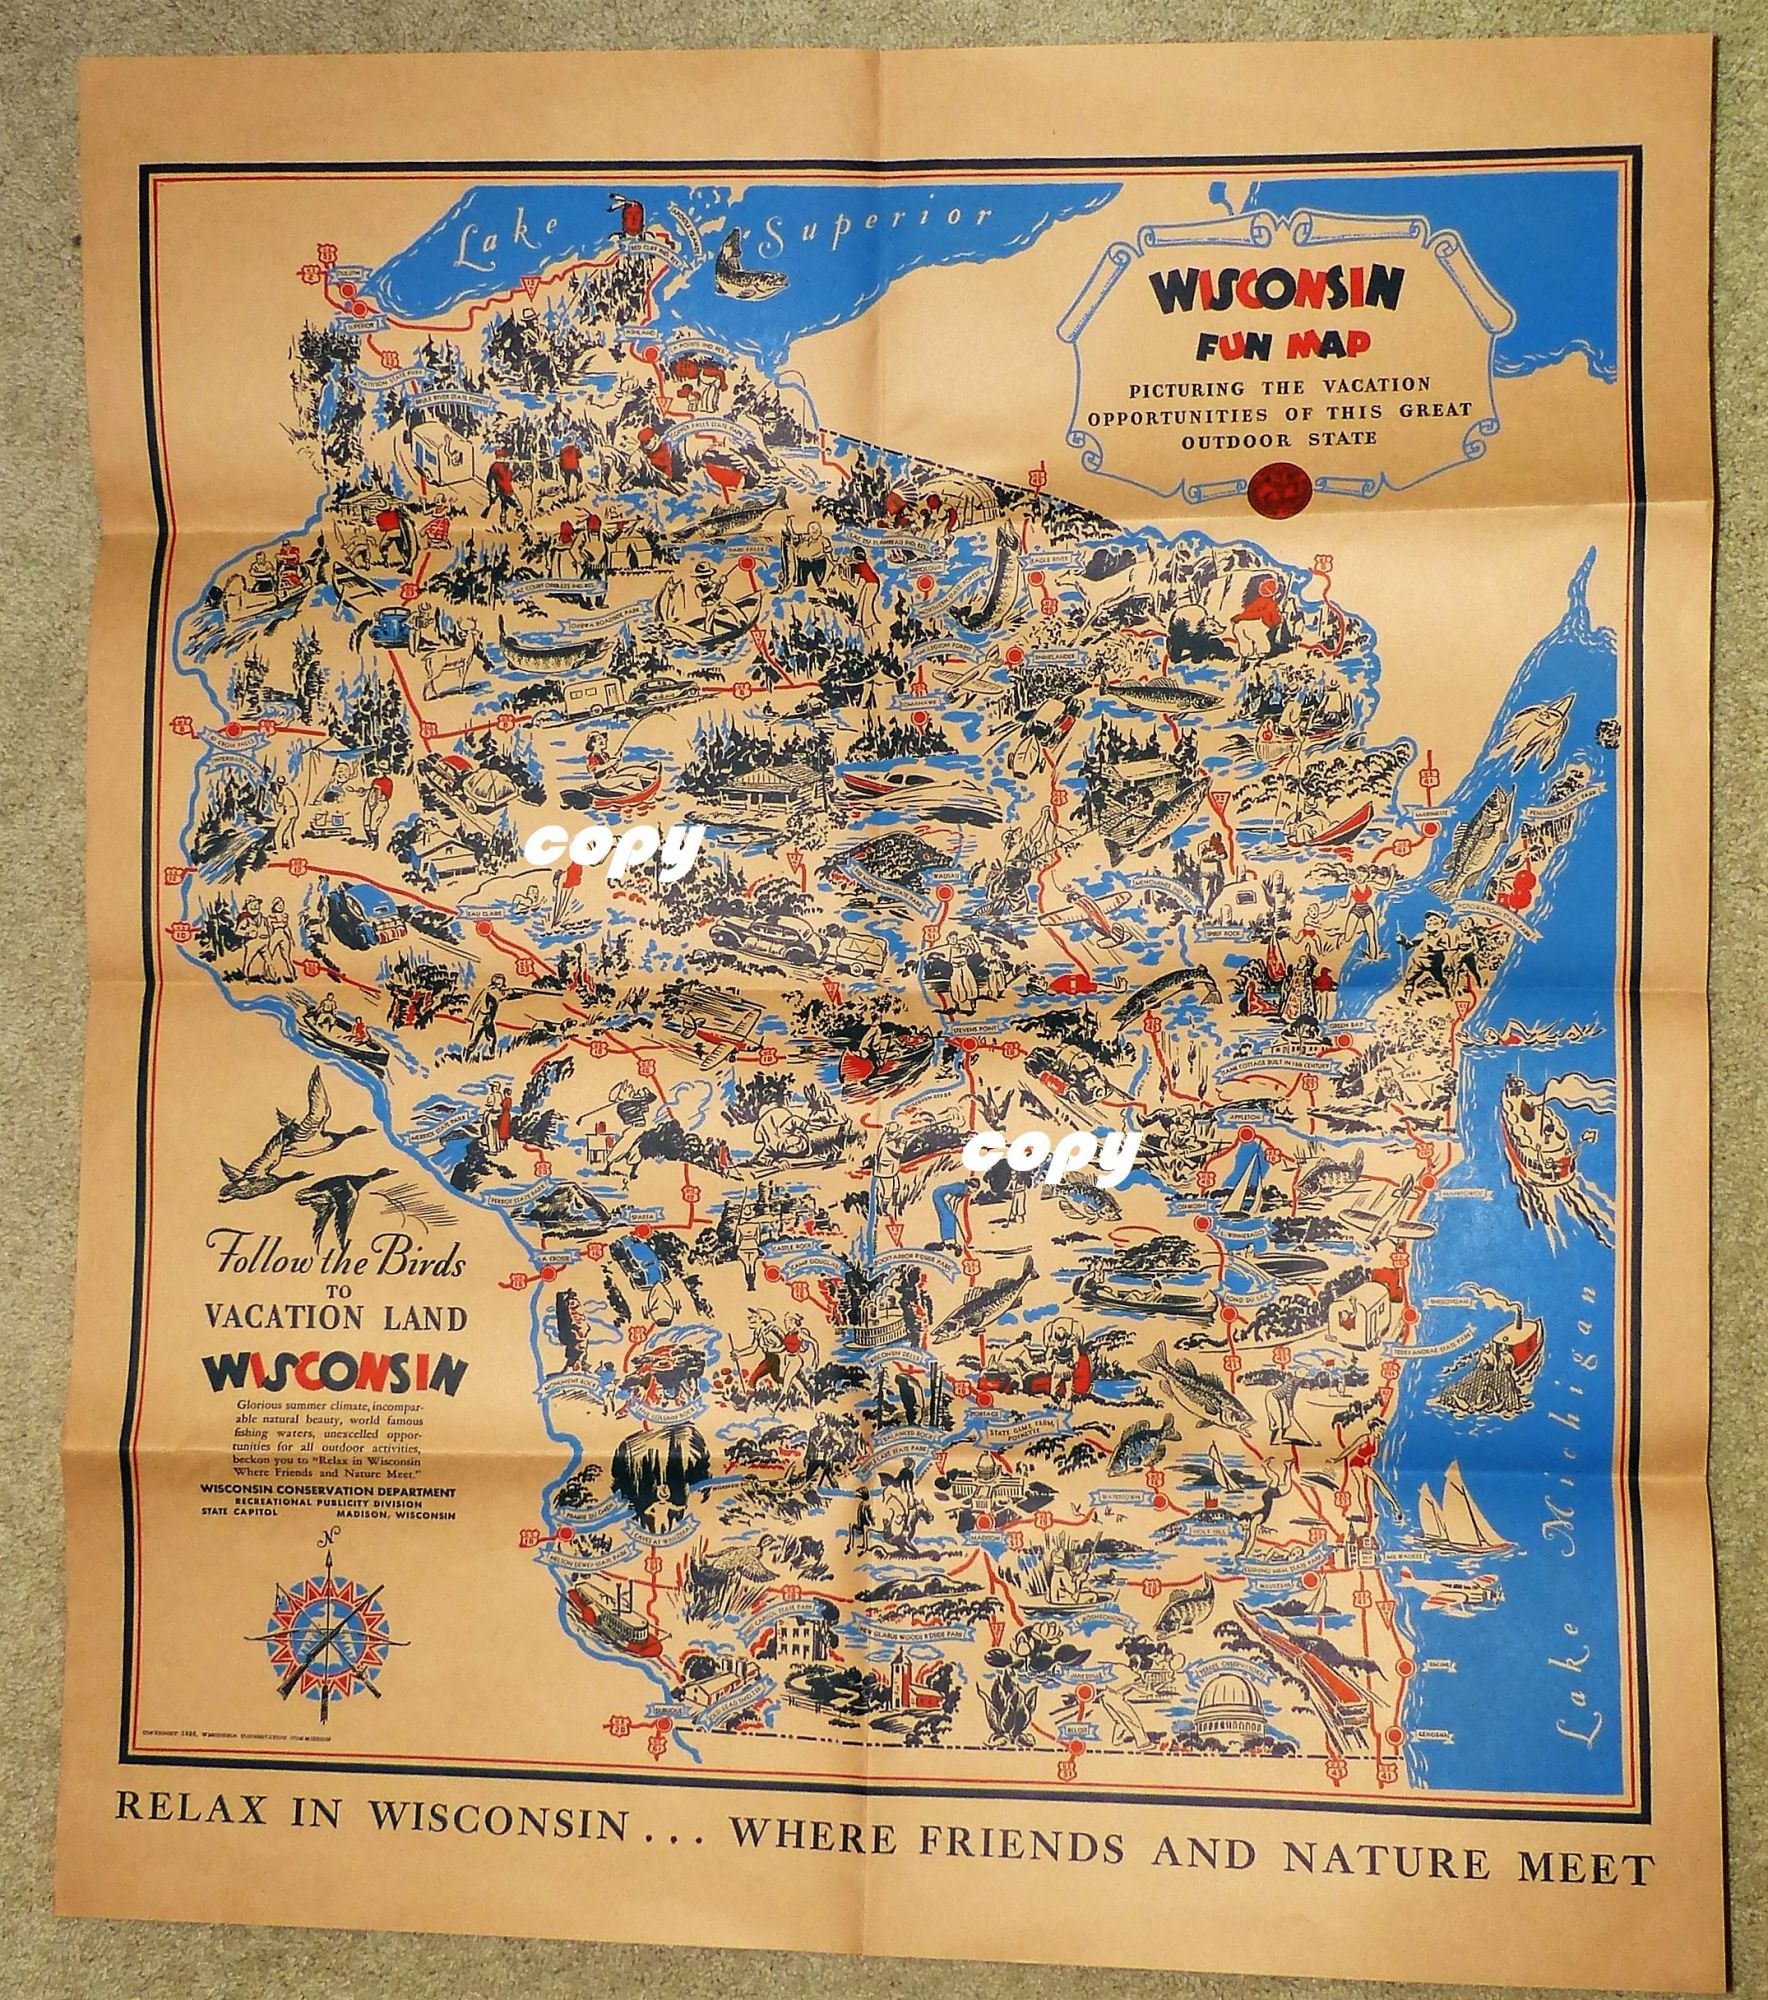 WISCONSIN FUN MAP: FOLLOW THE BIRDS TO VACATION LAND WISCONSIN, Wisconsin  Conservation Dept